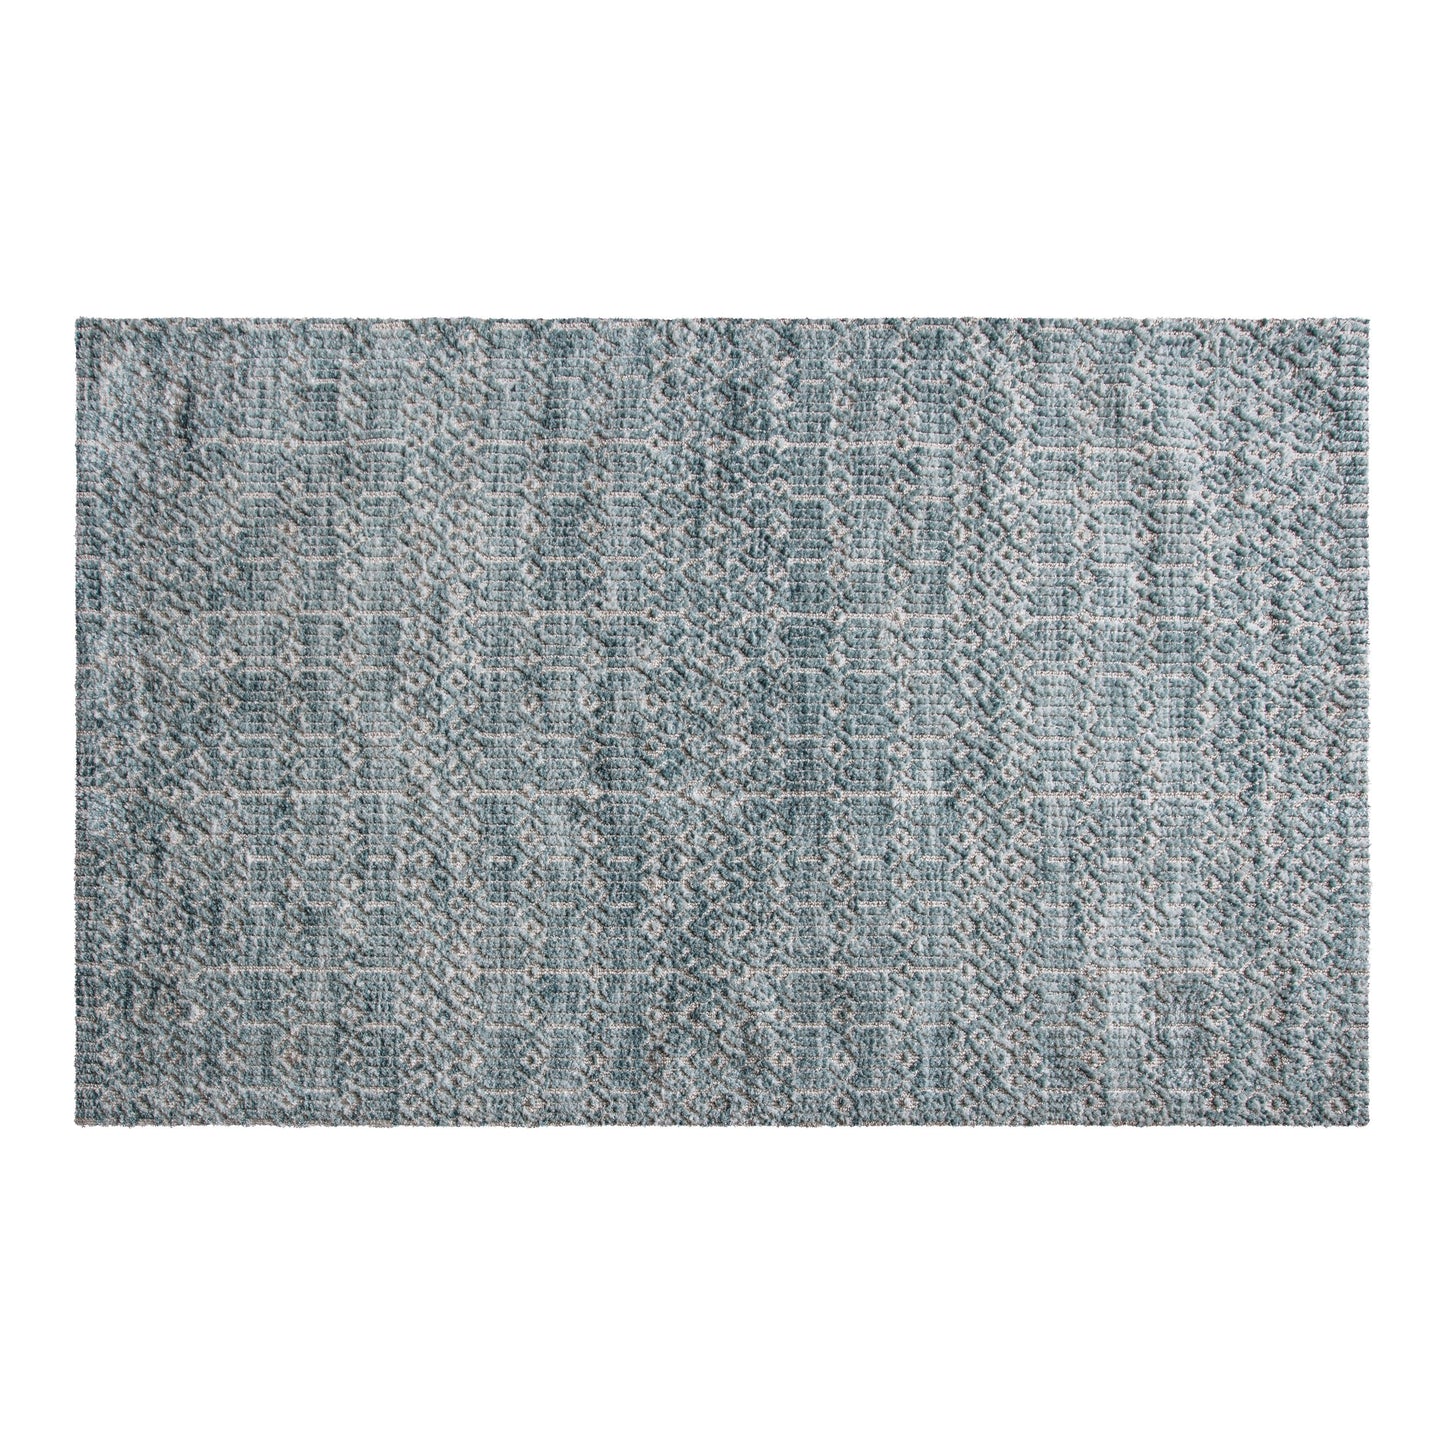 Load image into Gallery viewer, A geometric patterned Portlemouth Rug Duck Egg 1600x2300mm suitable for interior decor from Kikiathome.co.uk.
